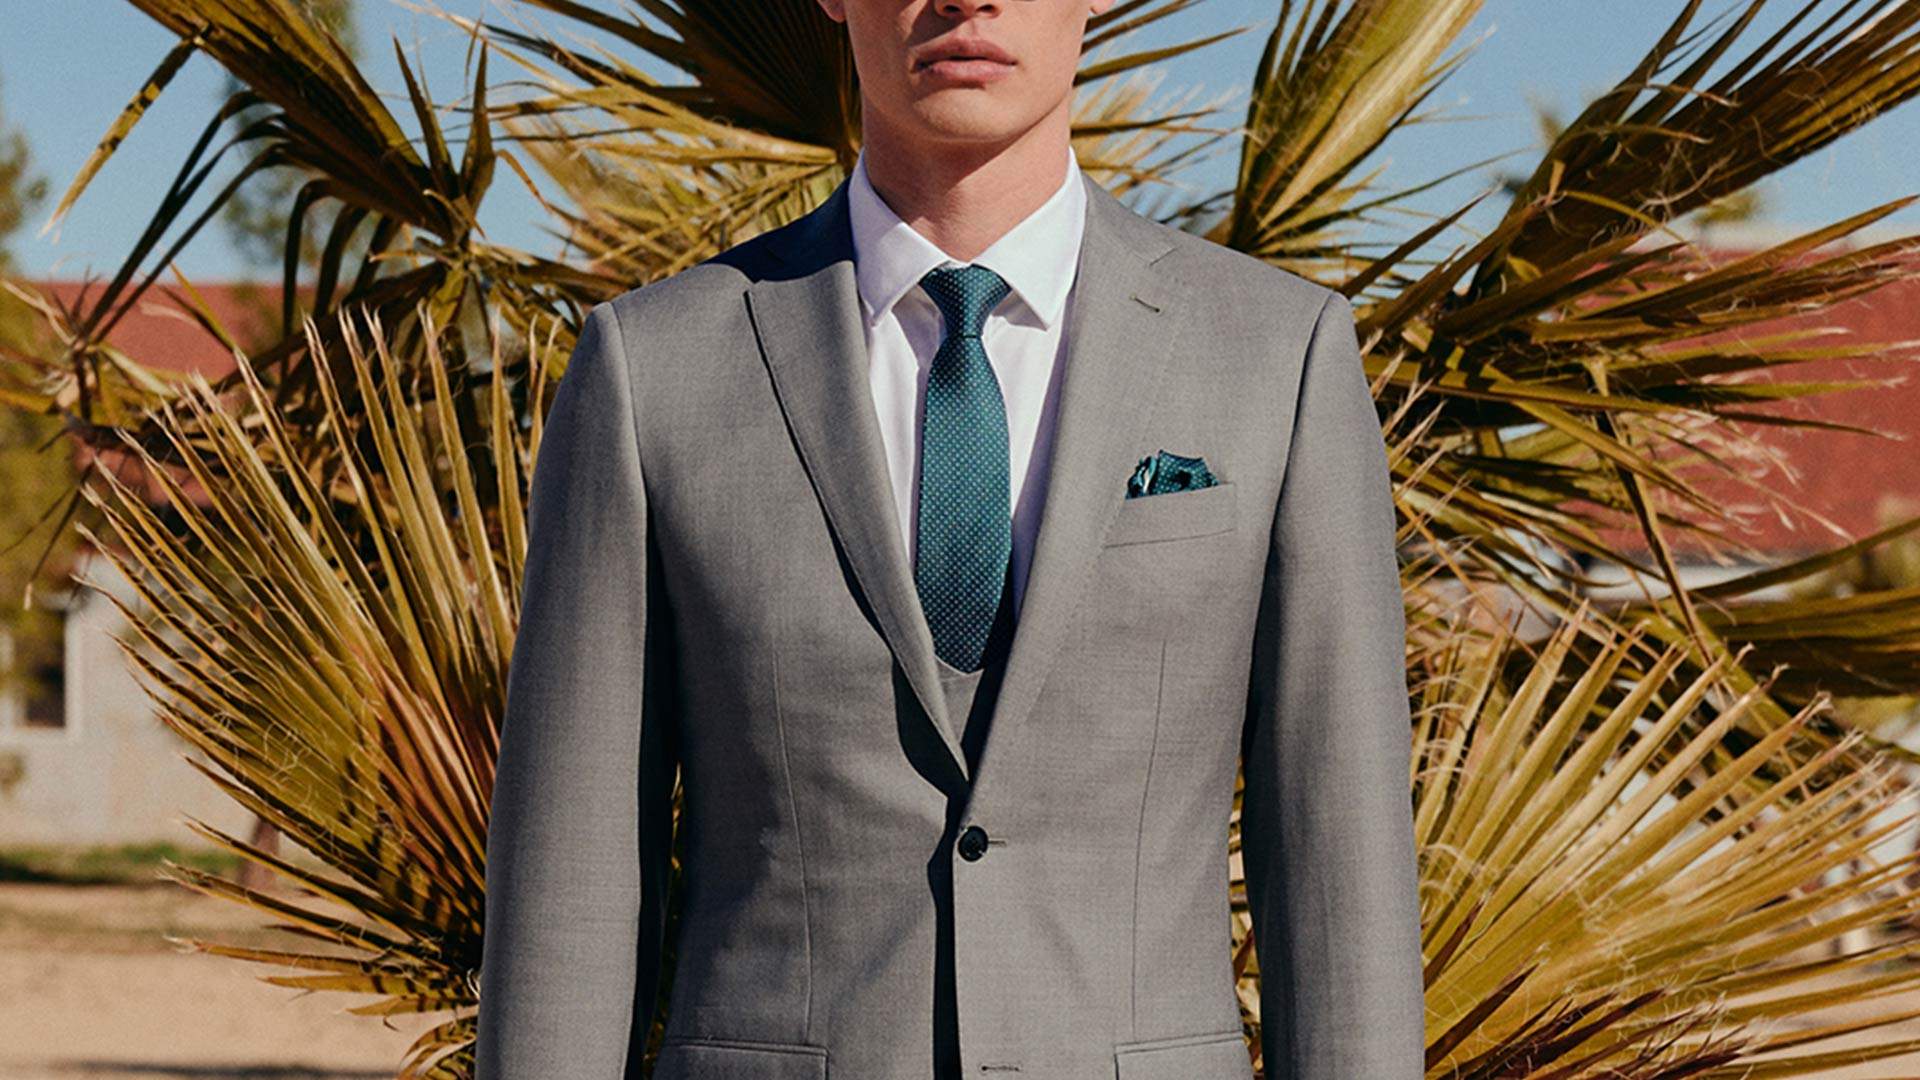 A Bluffer's Guide to Buying a Suit - Concrete Playground